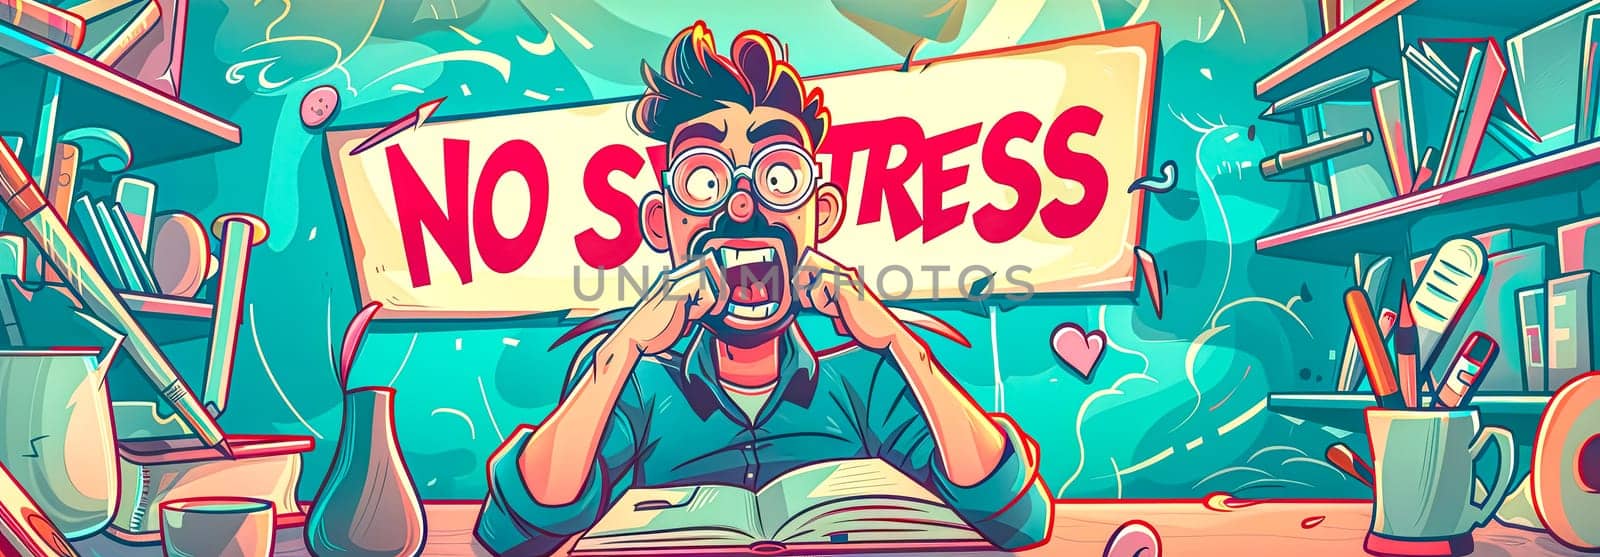 Quirky illustration of a man with a 'no stress' sign amidst a chaotic office setting